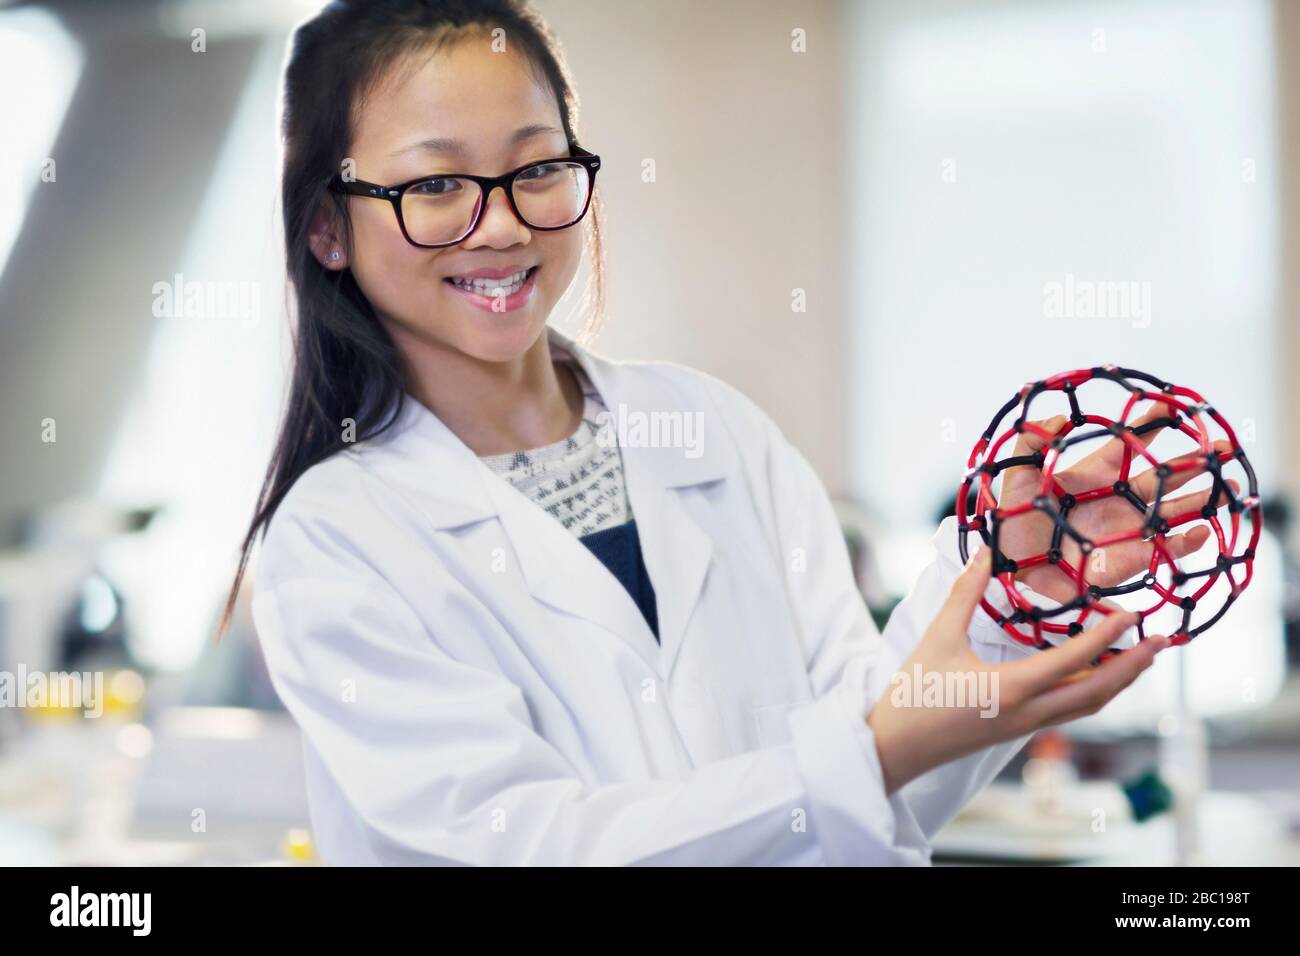 Portrait smiling, confident girl student holding molecular structure in laboratory classroom Stock Photo